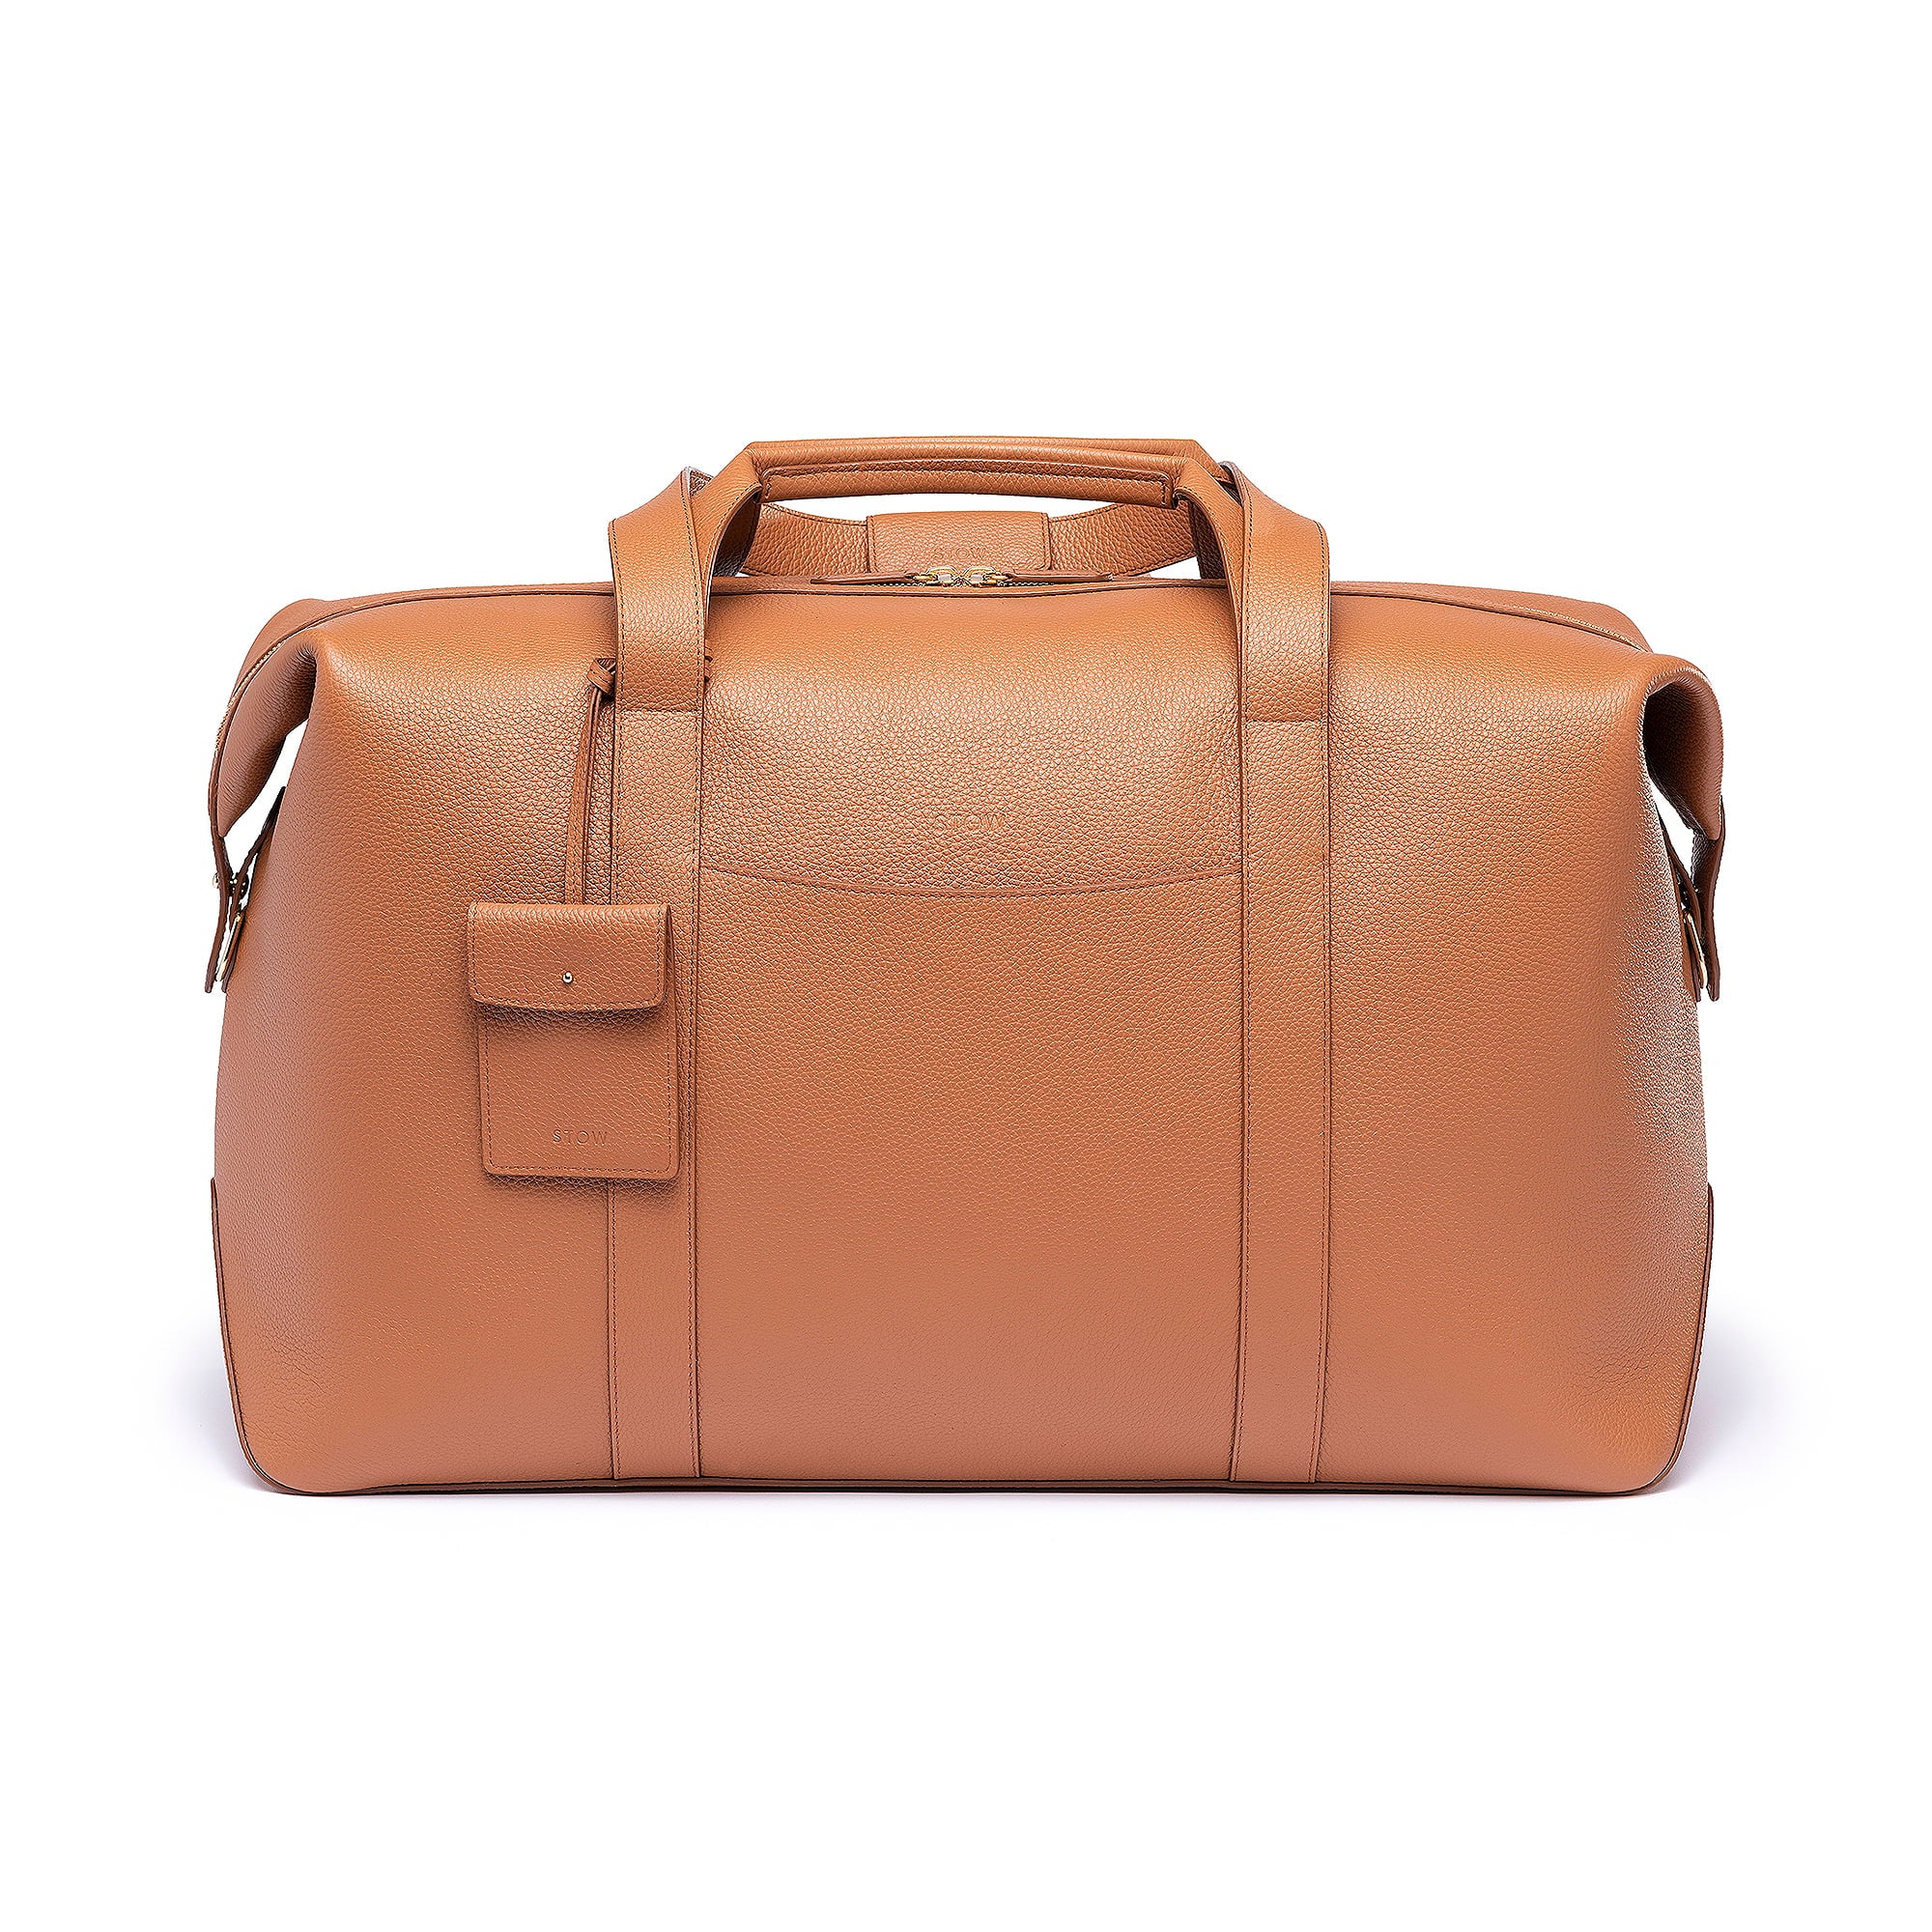 STOW Leather Weekend Bag in Earth Tan pebbled leather.